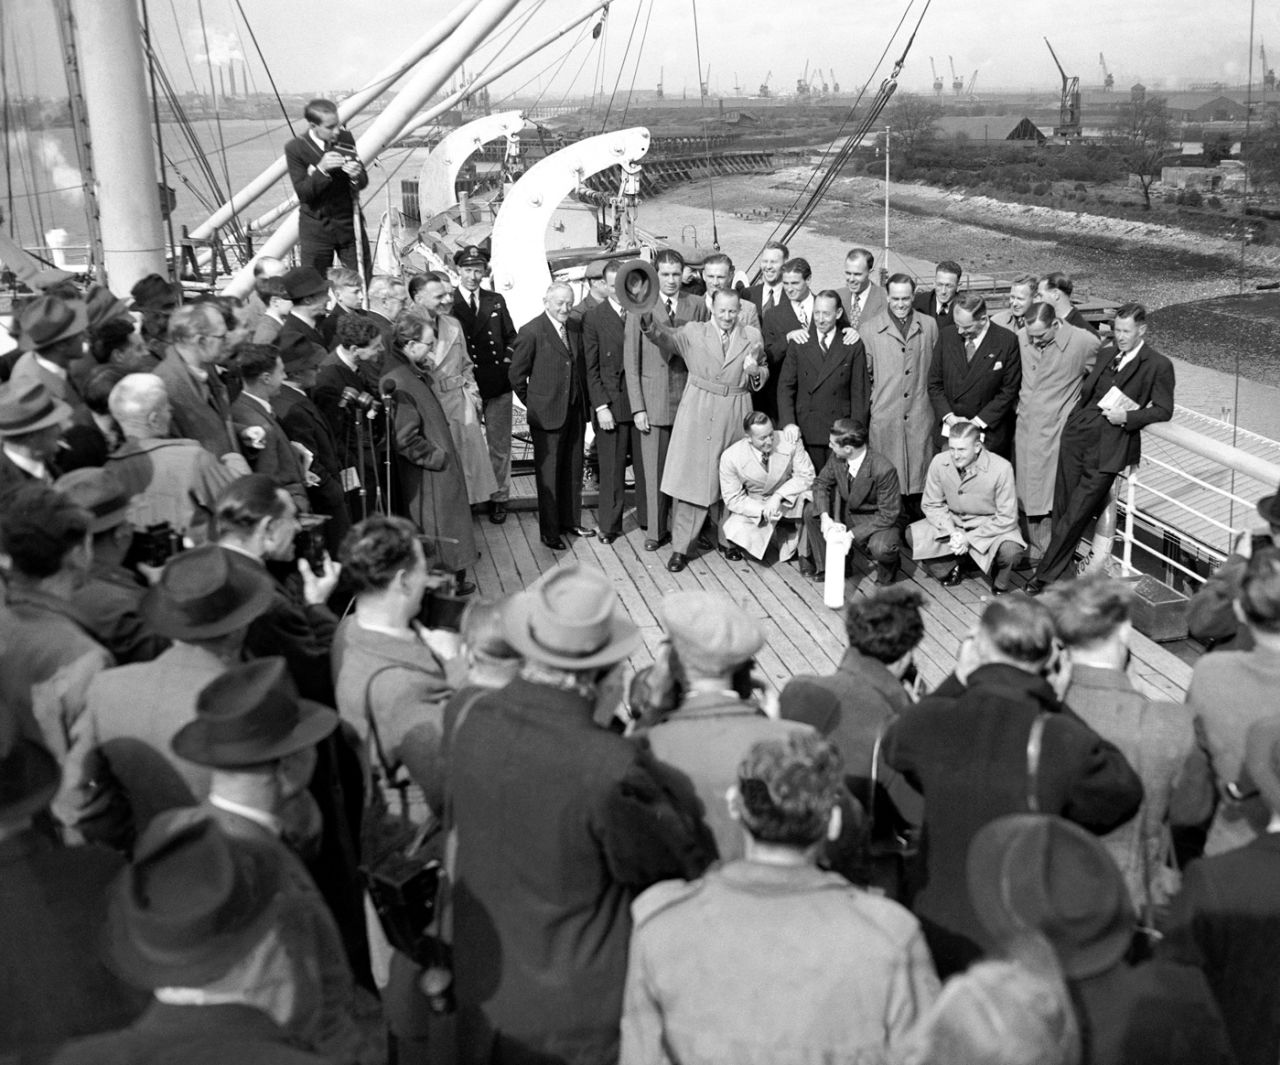 Don Bradman and the Australian team are greeted at the Tilbury docks upon their arrival for the 1948 Ashes, April 16, 1948